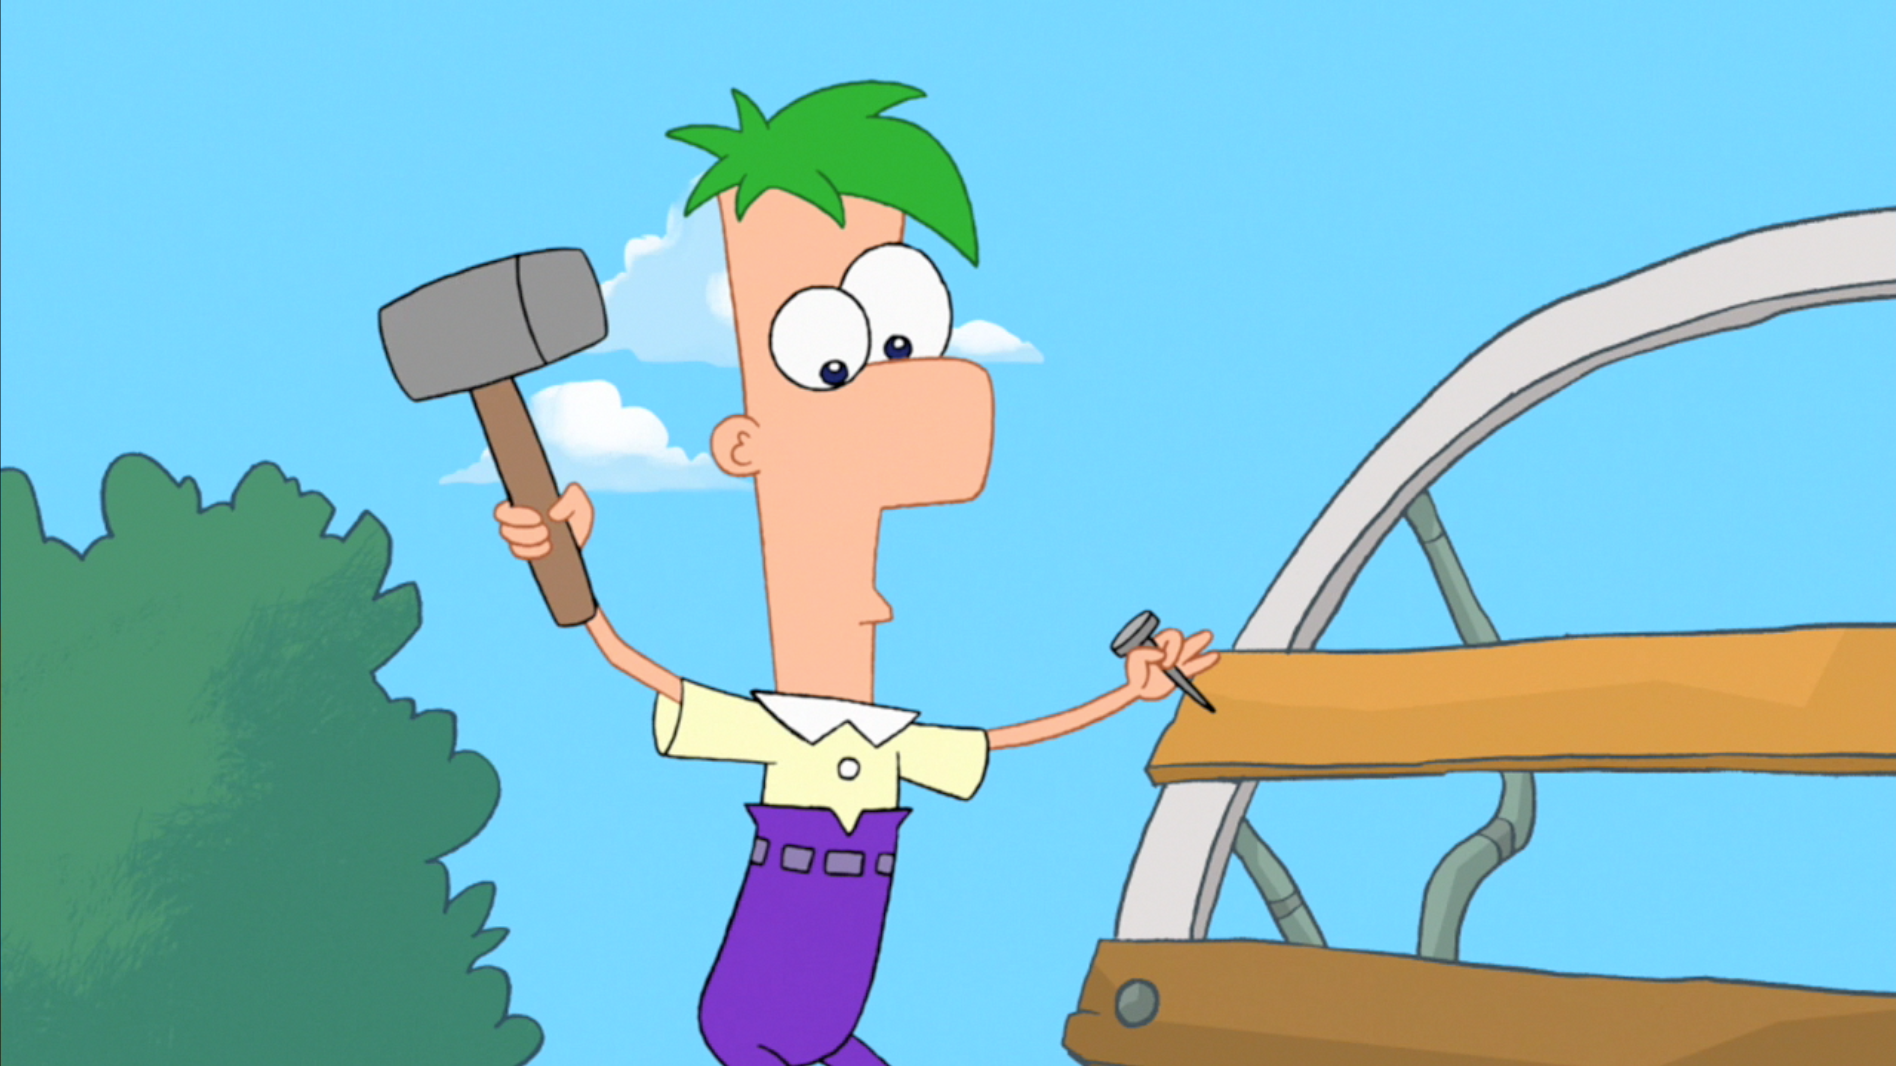 Major Monogram Phineas And Ferb Gay Porn - Ferb Fletcher | Phineas and Ferb Wiki | FANDOM powered by Wikia